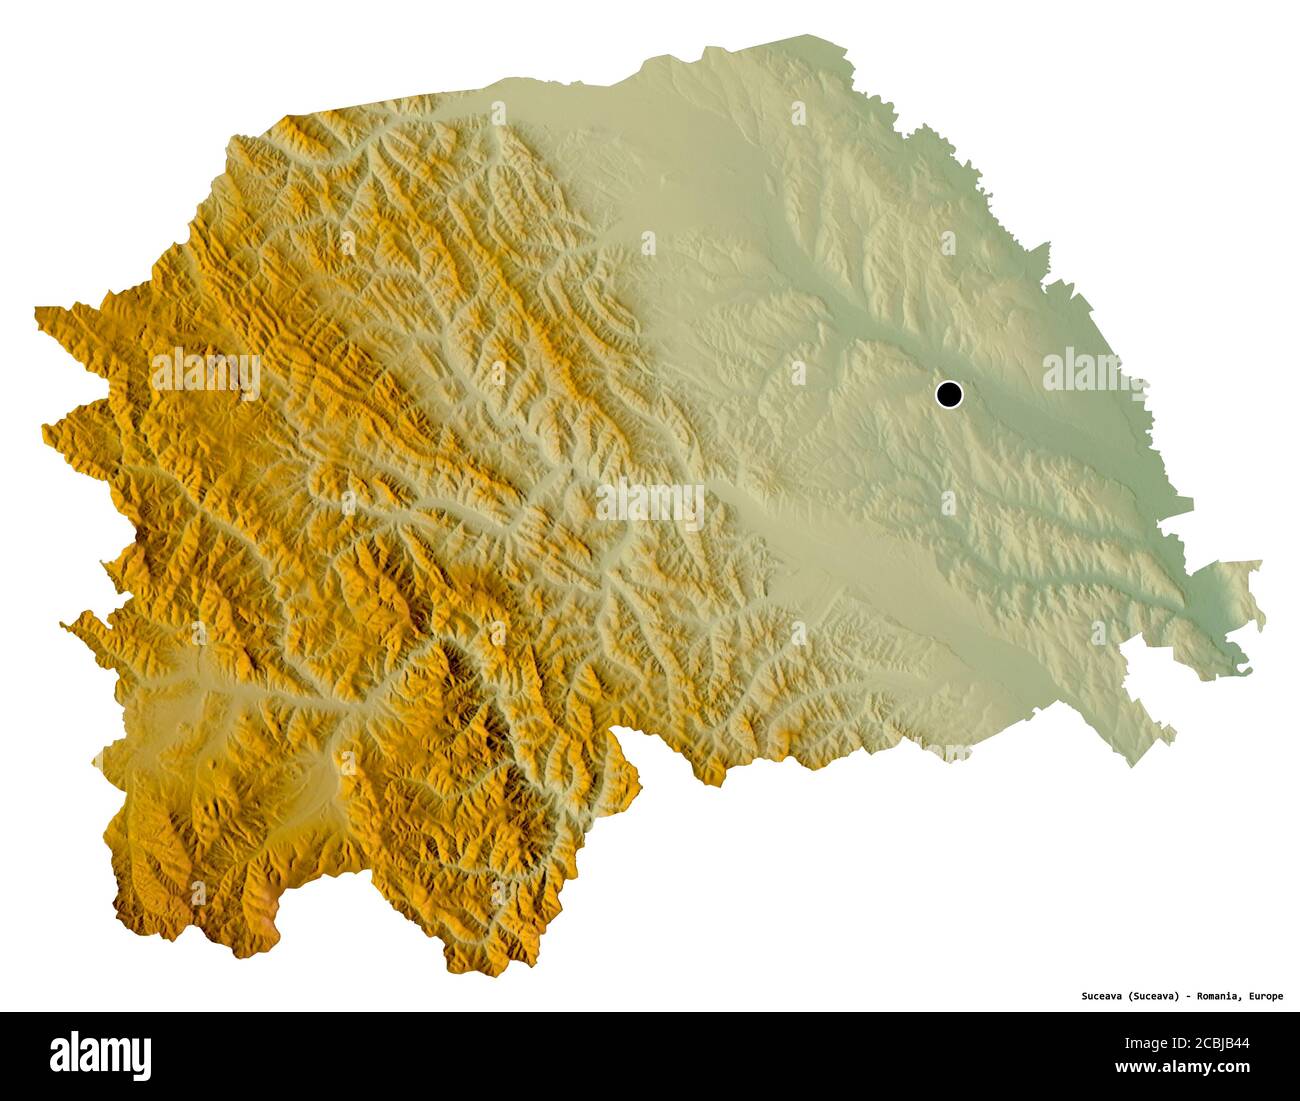 Graduation album make worse fear Shape of Suceava, county of Romania, with its capital isolated on white  background. Topographic relief map. 3D rendering Stock Photo - Alamy